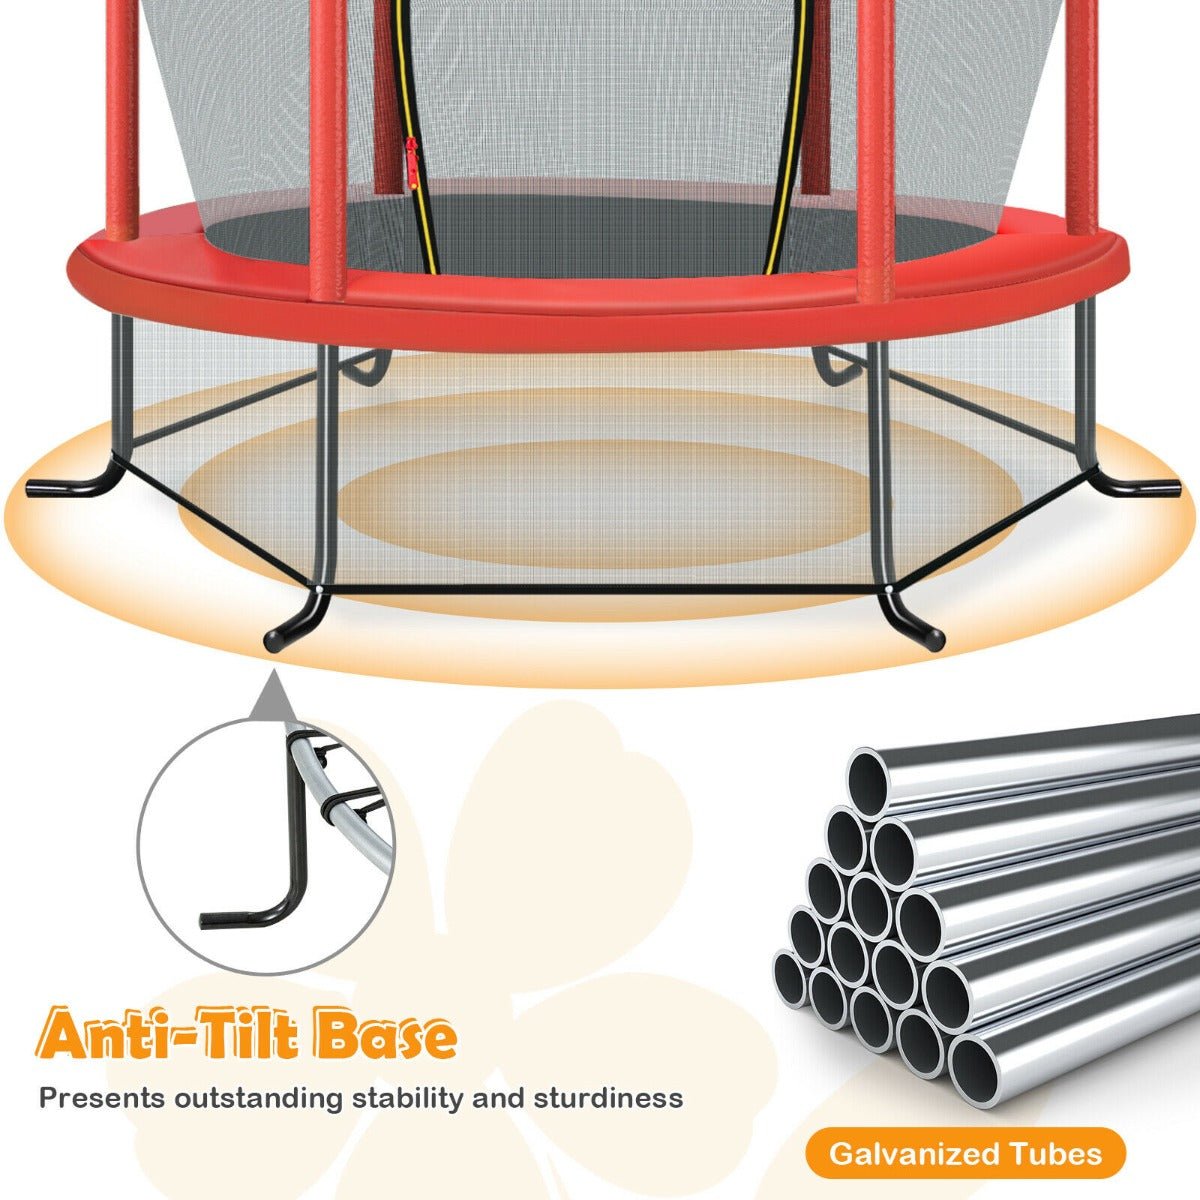 Boundless Joy: Red Mini Trampoline with Enclosure Net for Kids